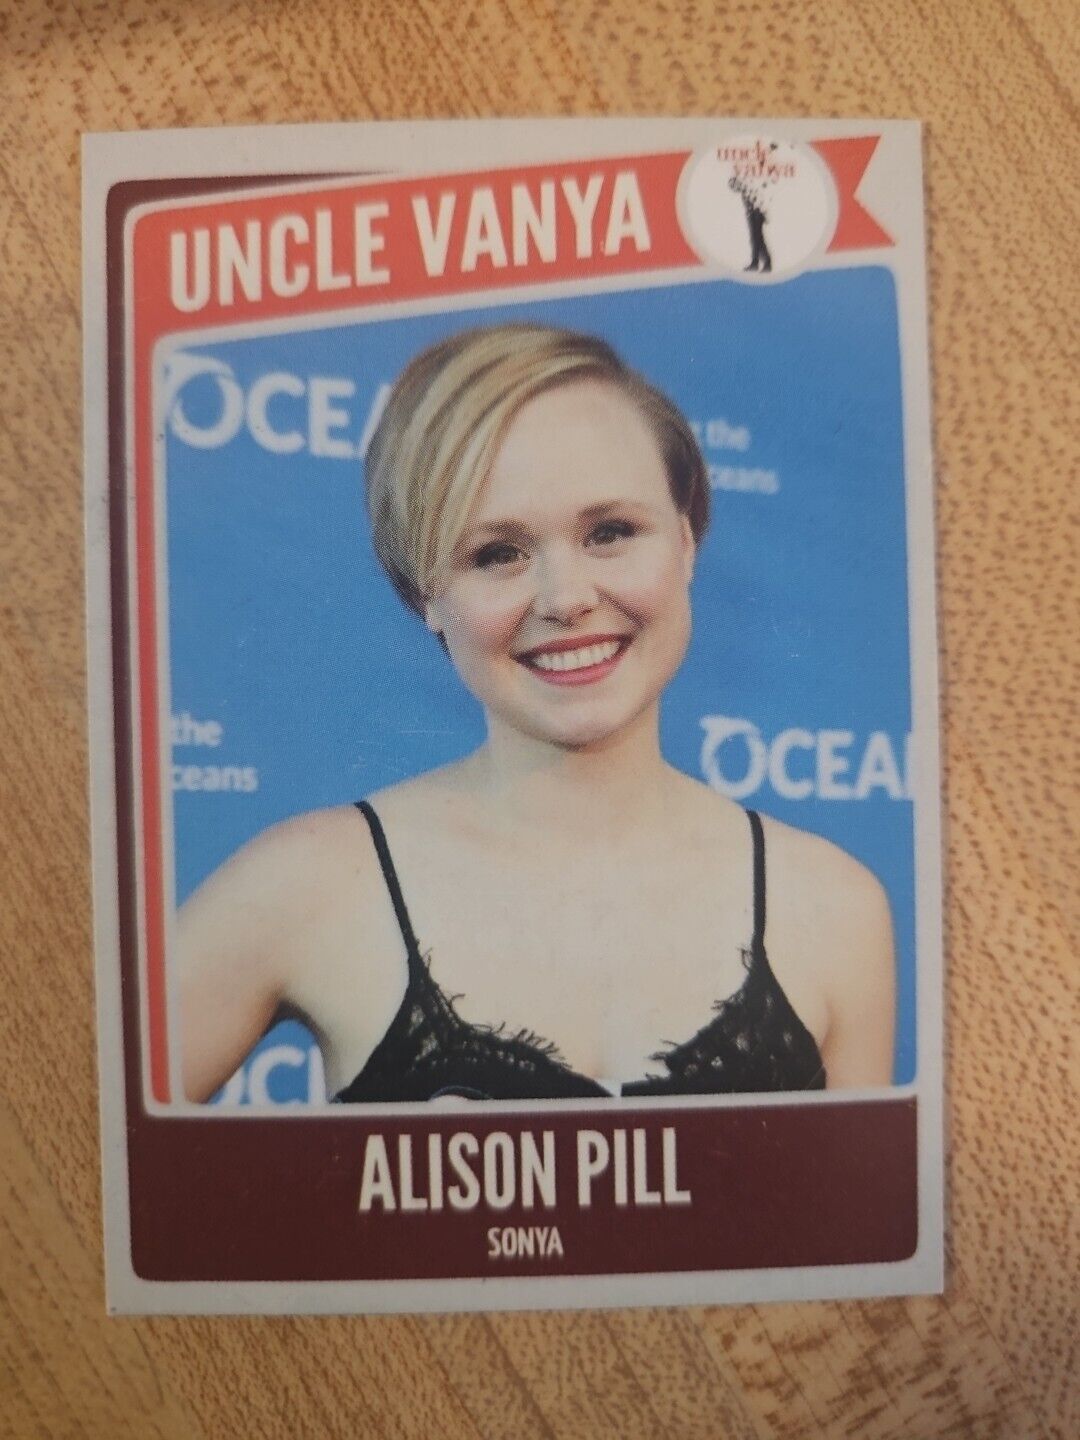 Alison Pill Custom Card - Played Sonya In Uncle Vanya At Lincoln Center